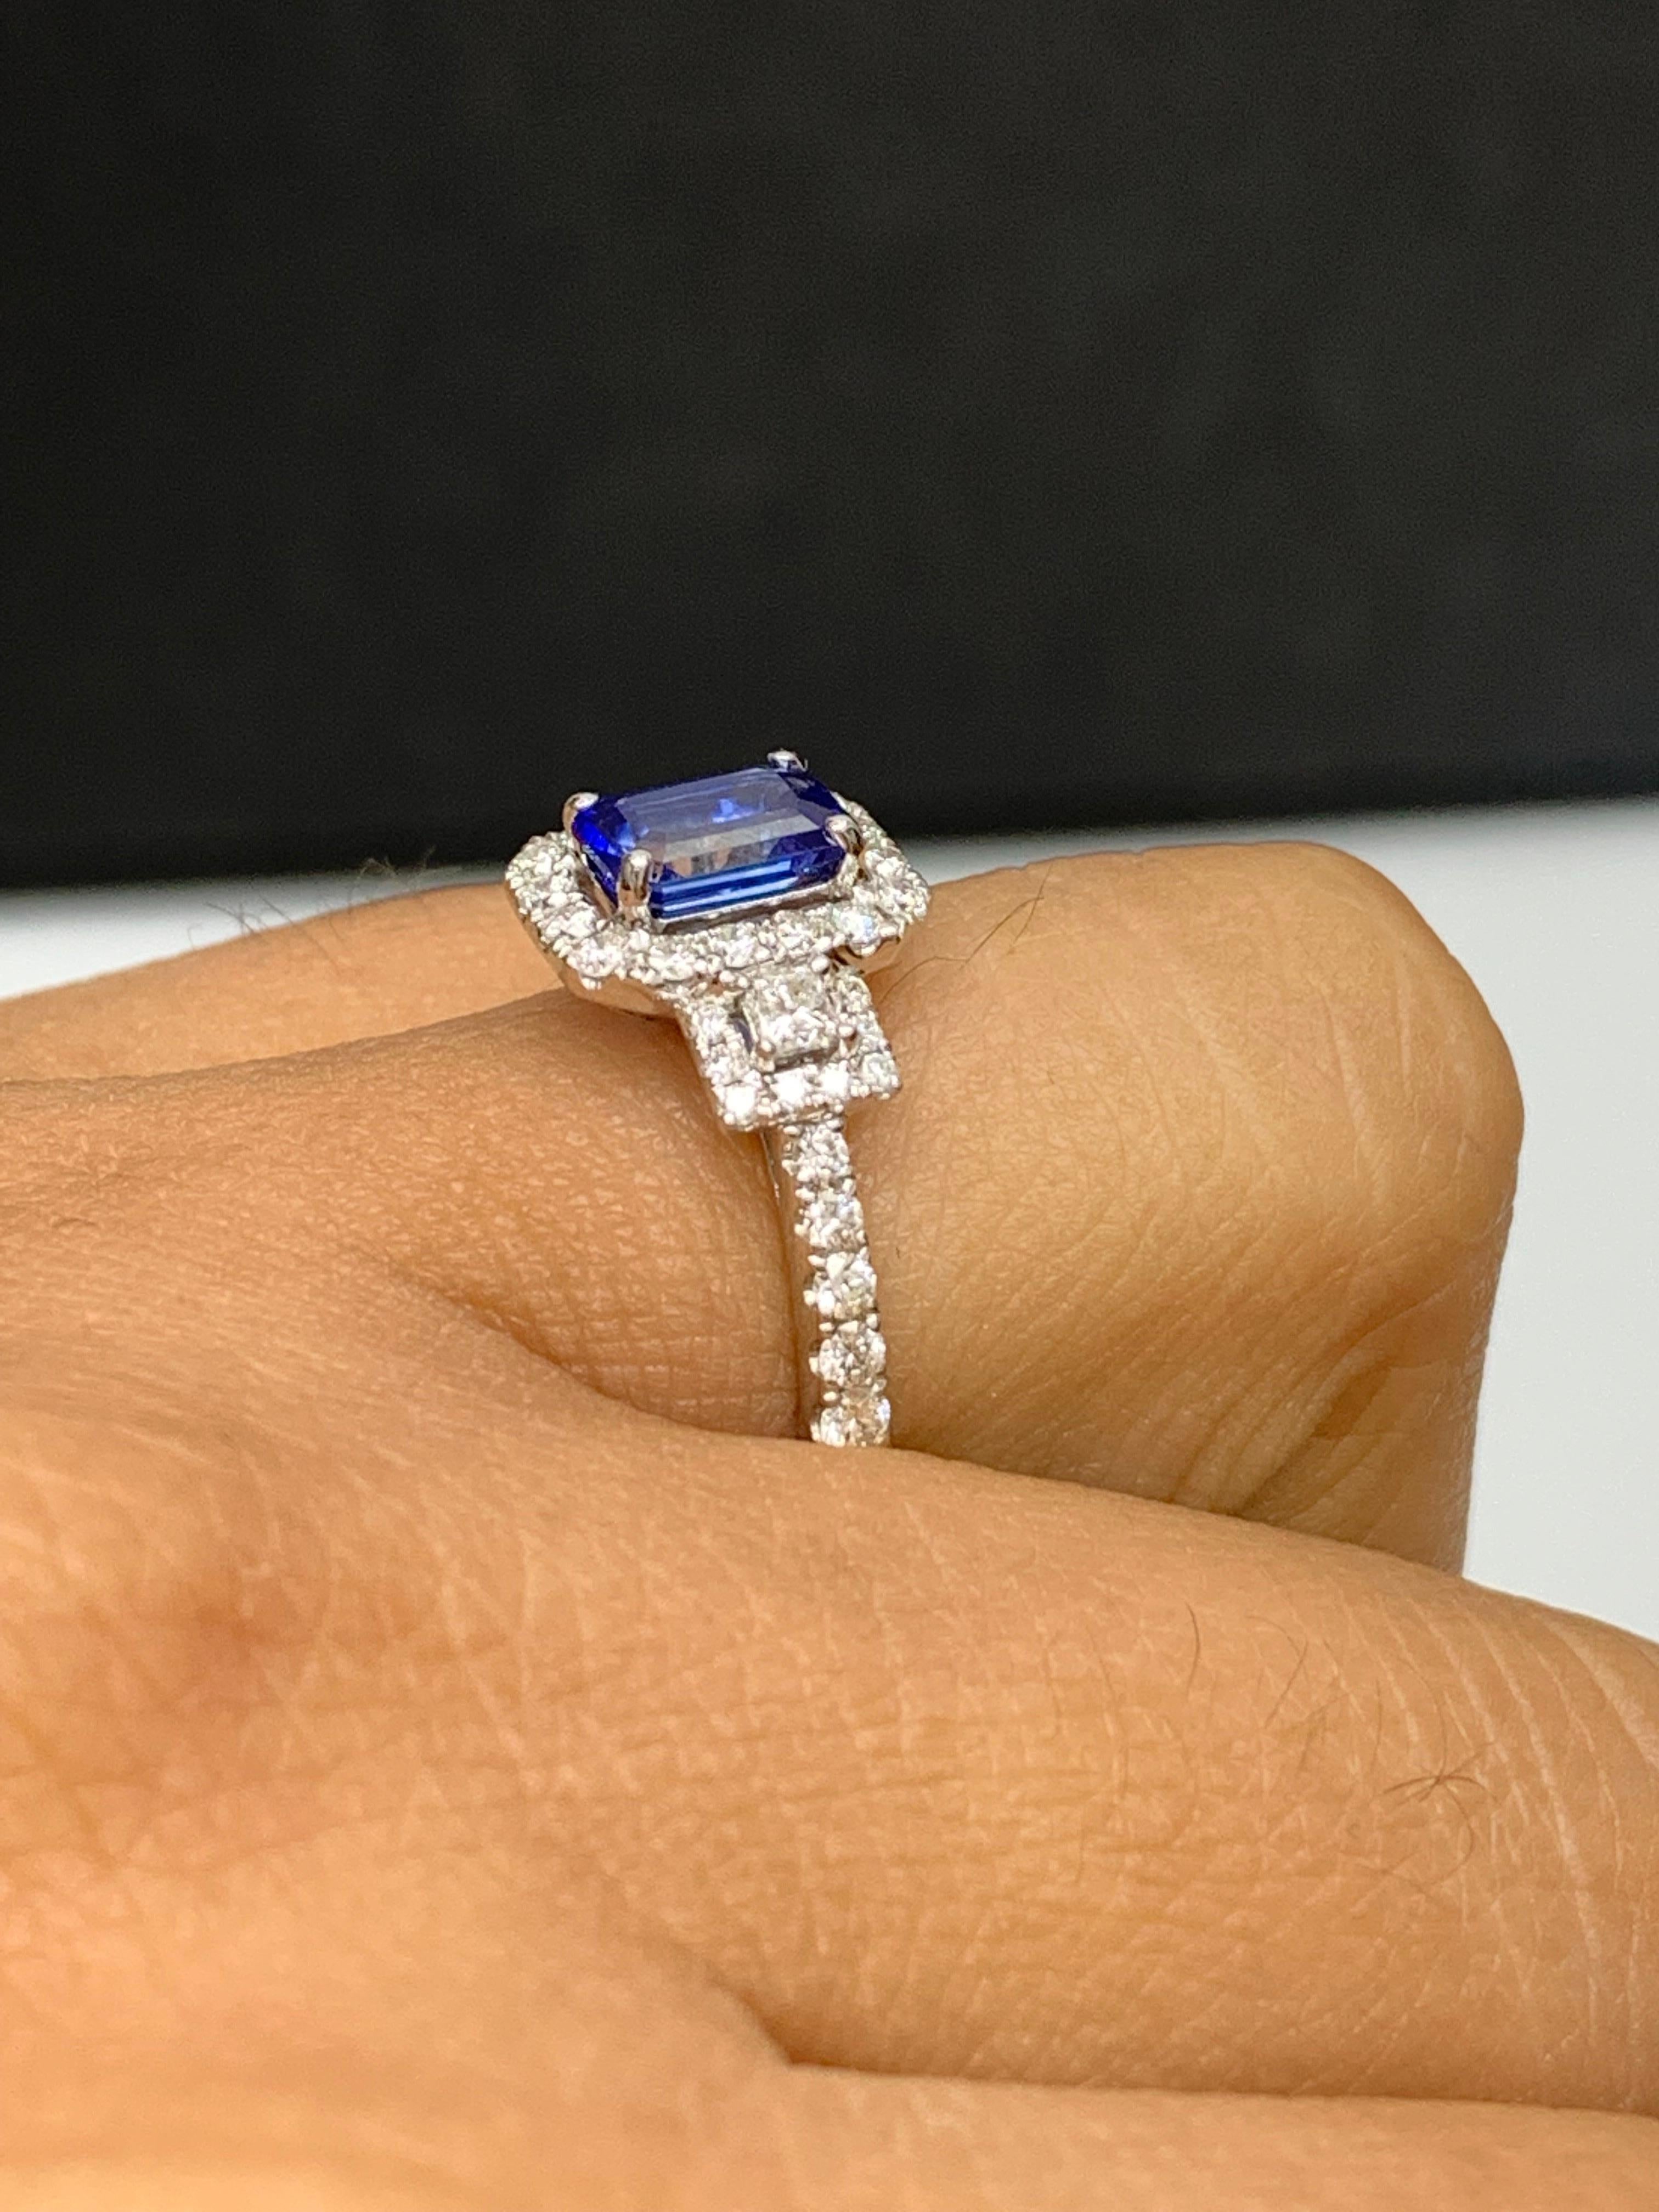 Women's 1.21 Carat Emerald Cut Blue Sapphire and Diamond Halo Ring in 18K White Gold For Sale